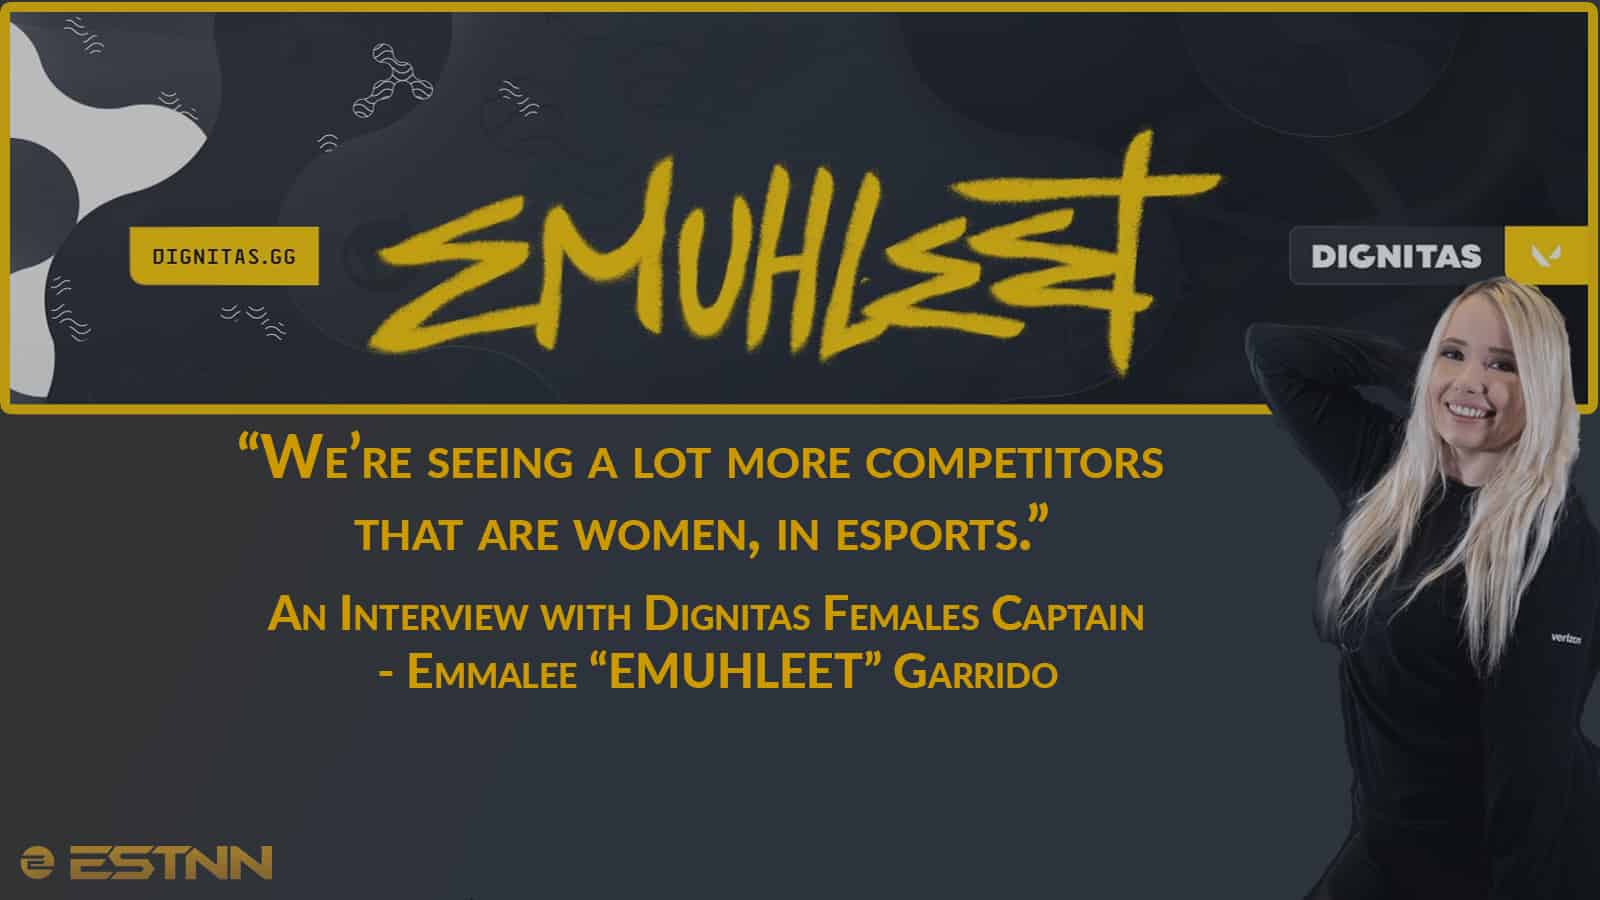 “We’re seeing a lot more competitors that are women, in esports.” – Dignitas Females Captain, Emmalee “EMUHLEET” Garrido.